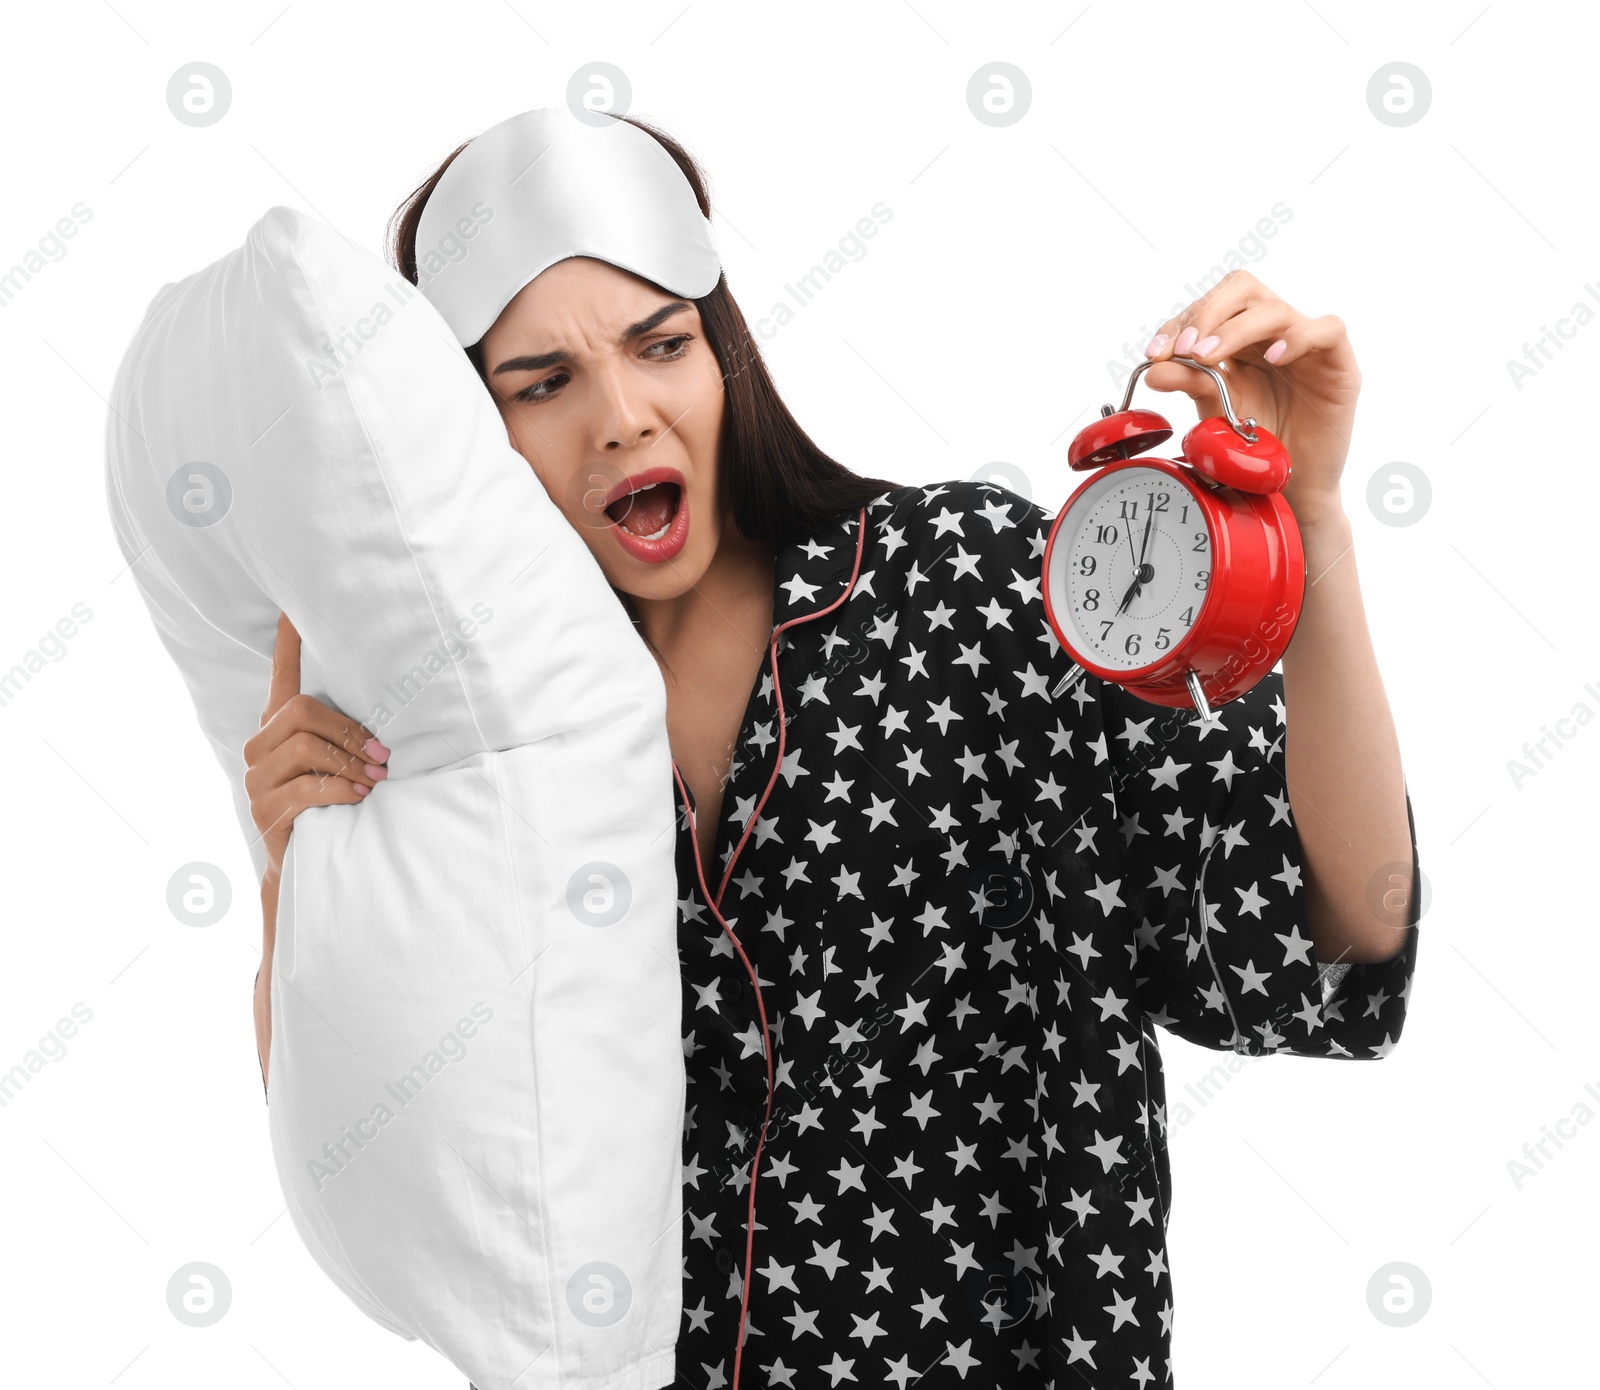 Photo of Emotional overslept woman with alarm clock and pillow on white background. Being late concept